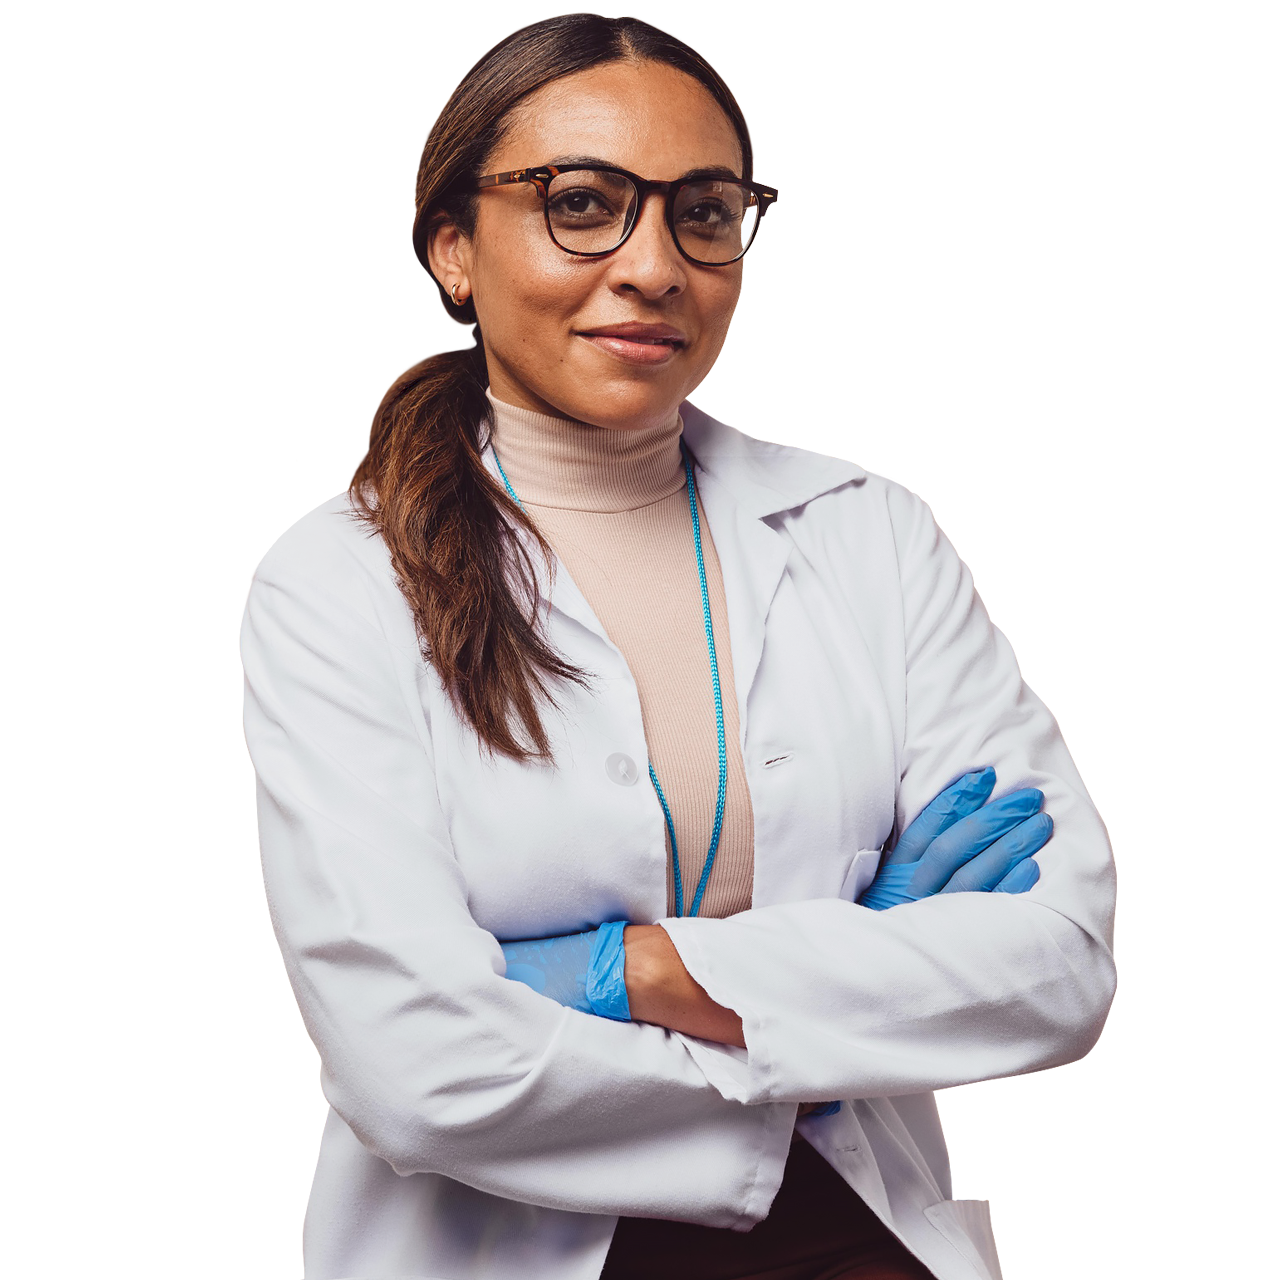 Woman wearing glasses, lab coat and glvoes with arms crossed